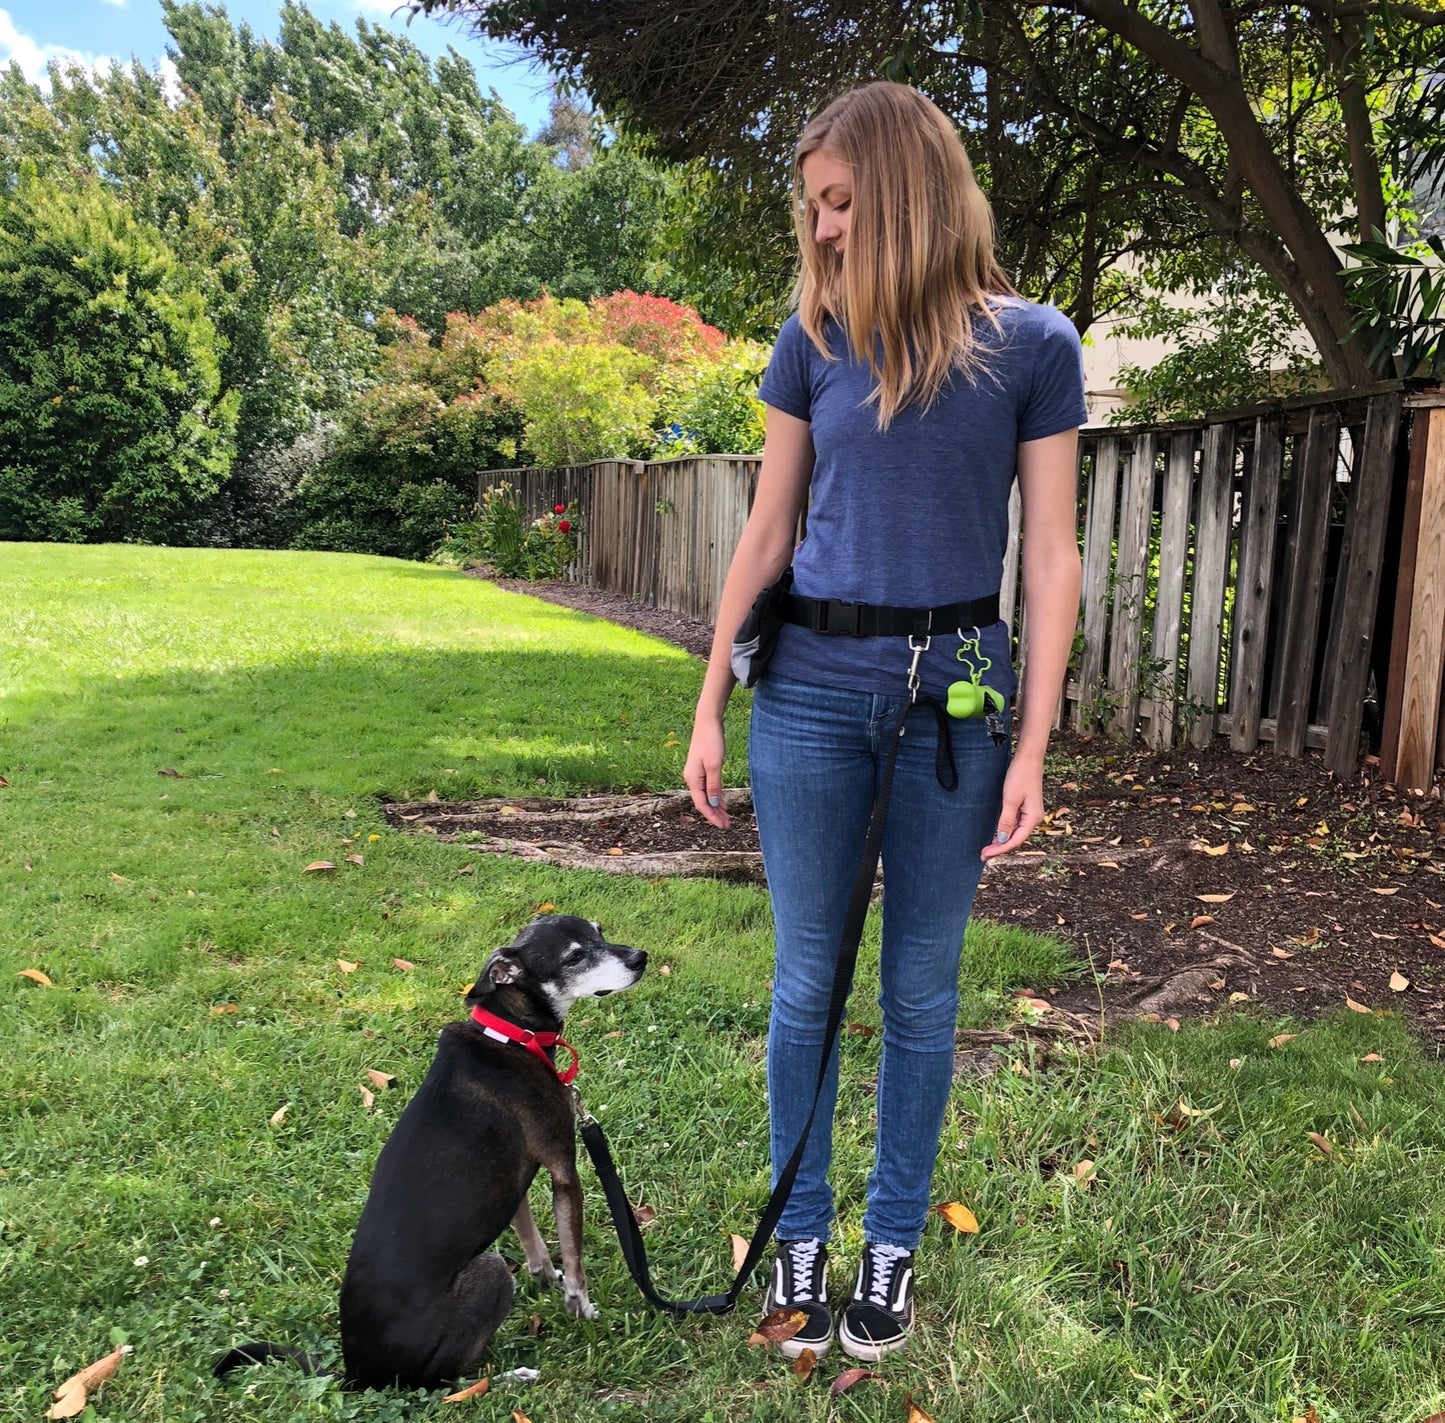 a photo of a your woman standing on grass with a black dog wearing a fearless pet adjustable leash attached to her with a belt